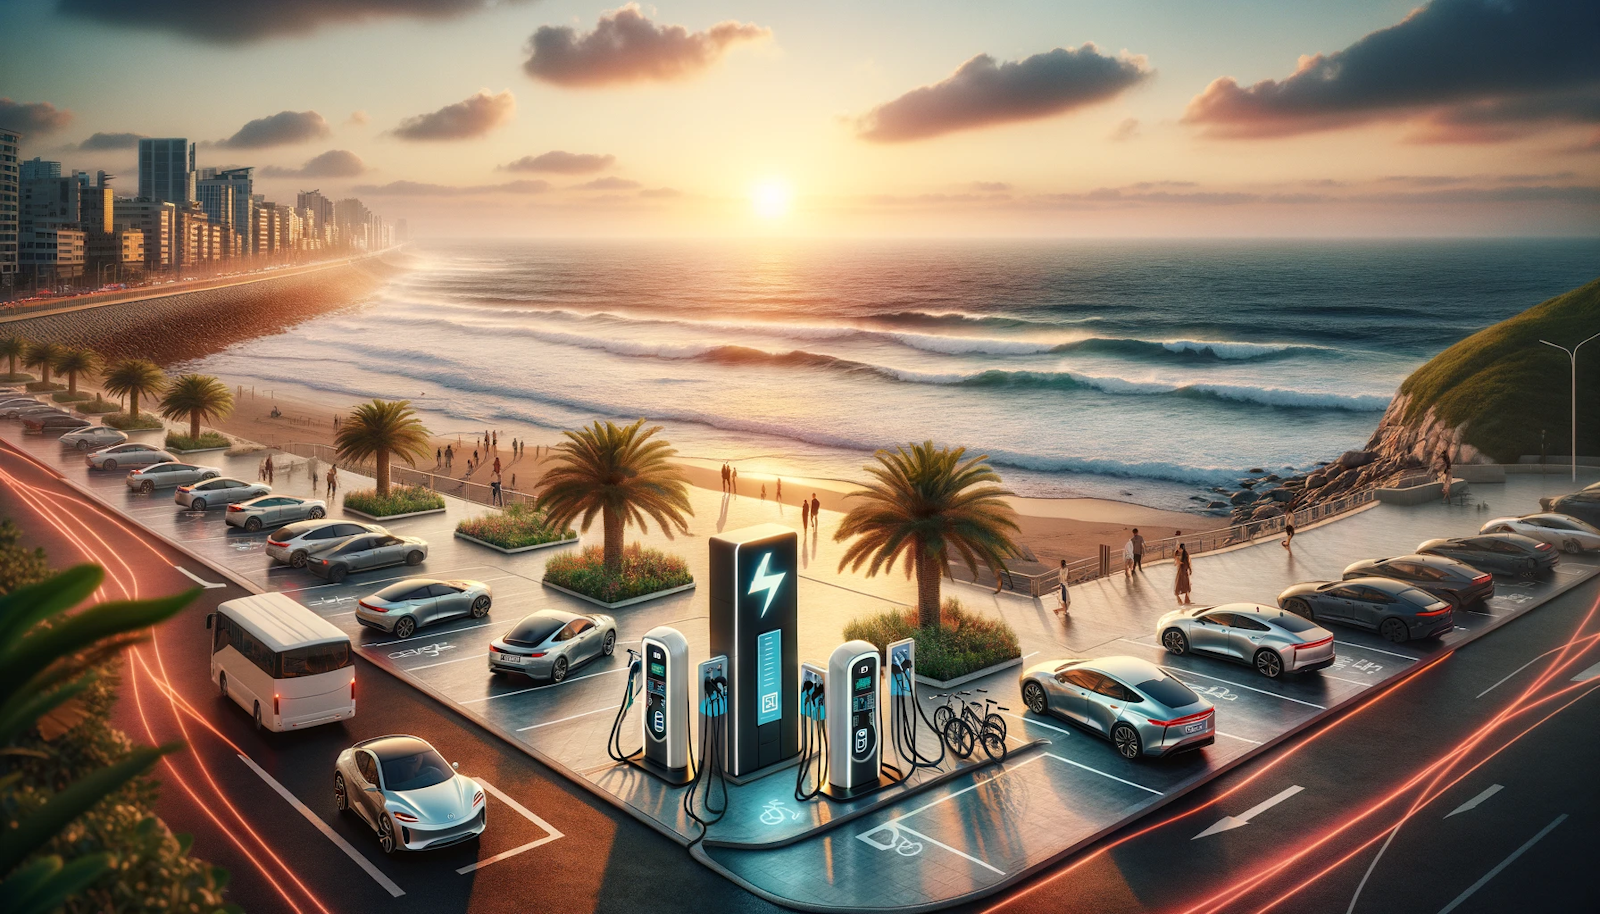 Coastal cityscape at sunset with an electric vehicle (EV) charging station on a busy promenade, surrounded by palm trees and the ocean, illustrating sustainable urban living.